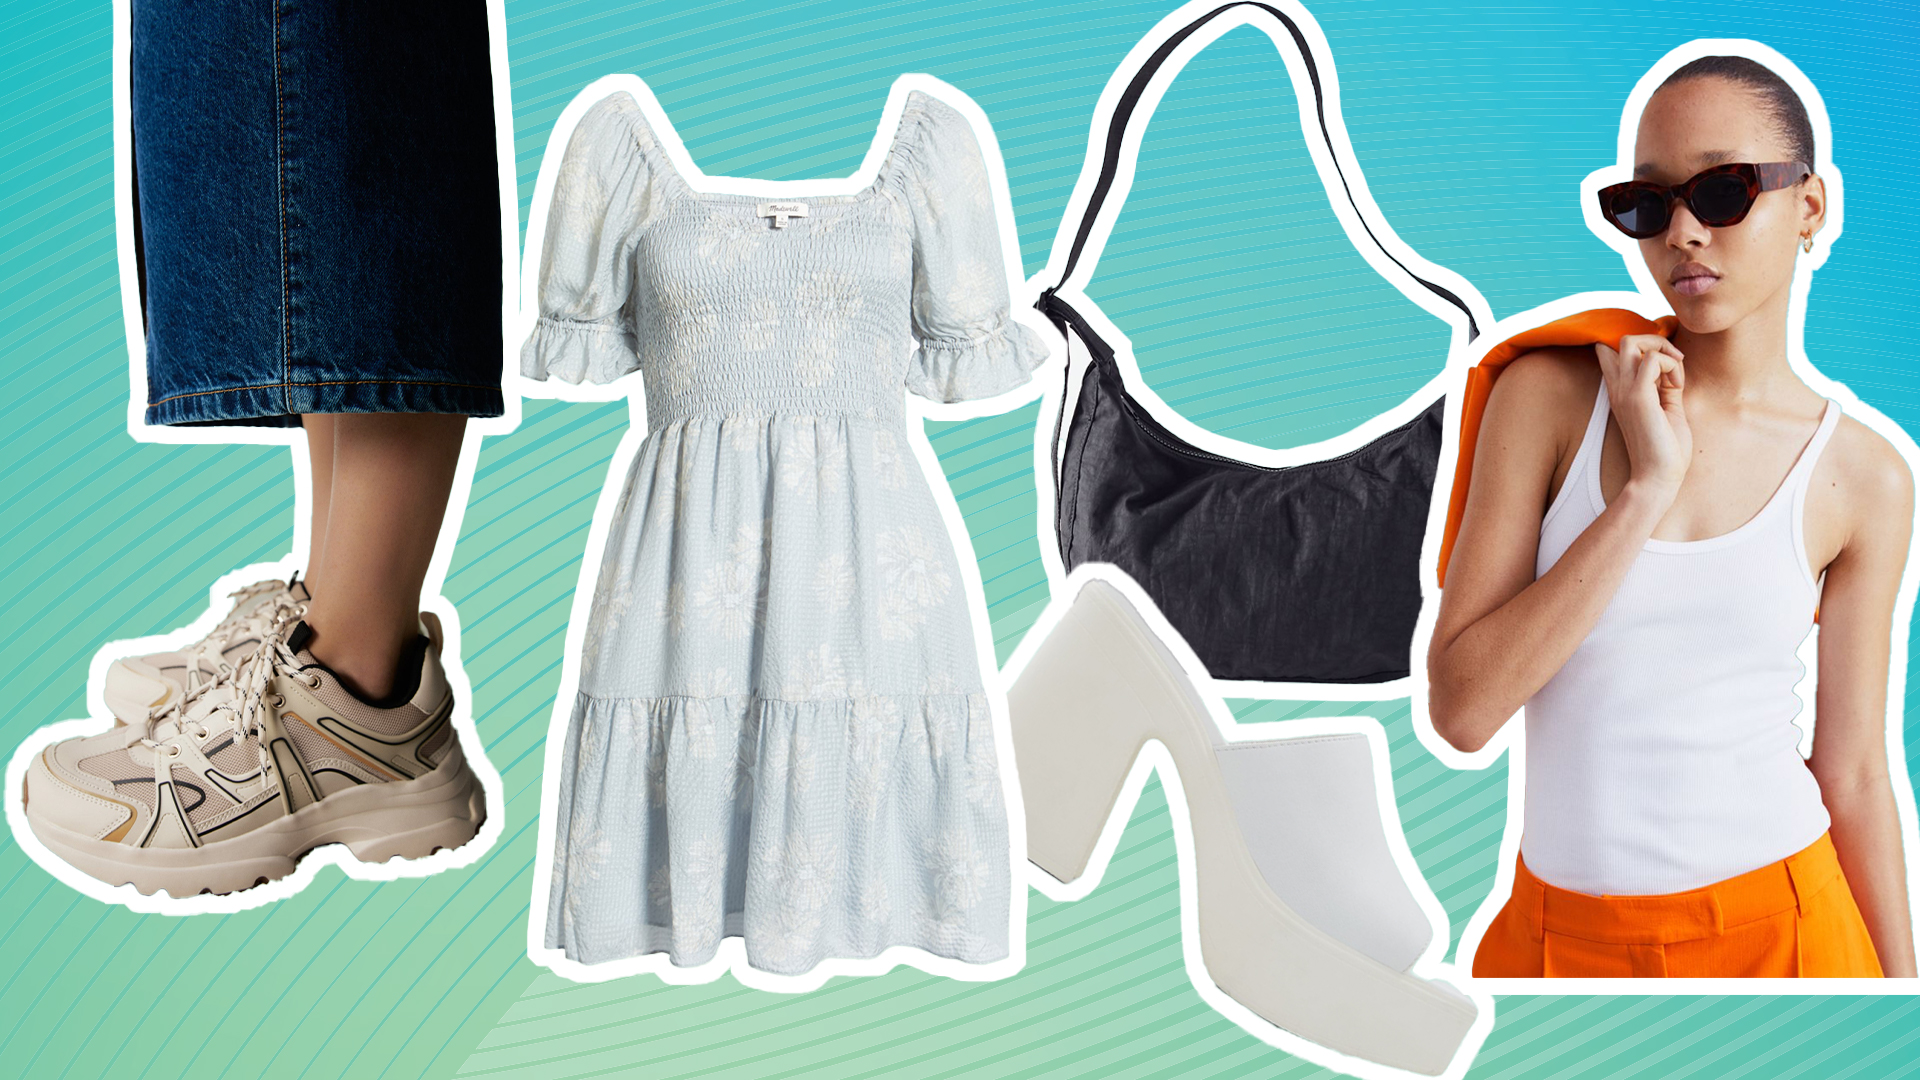 Easy and affordable outfit swaps to get on trend this season